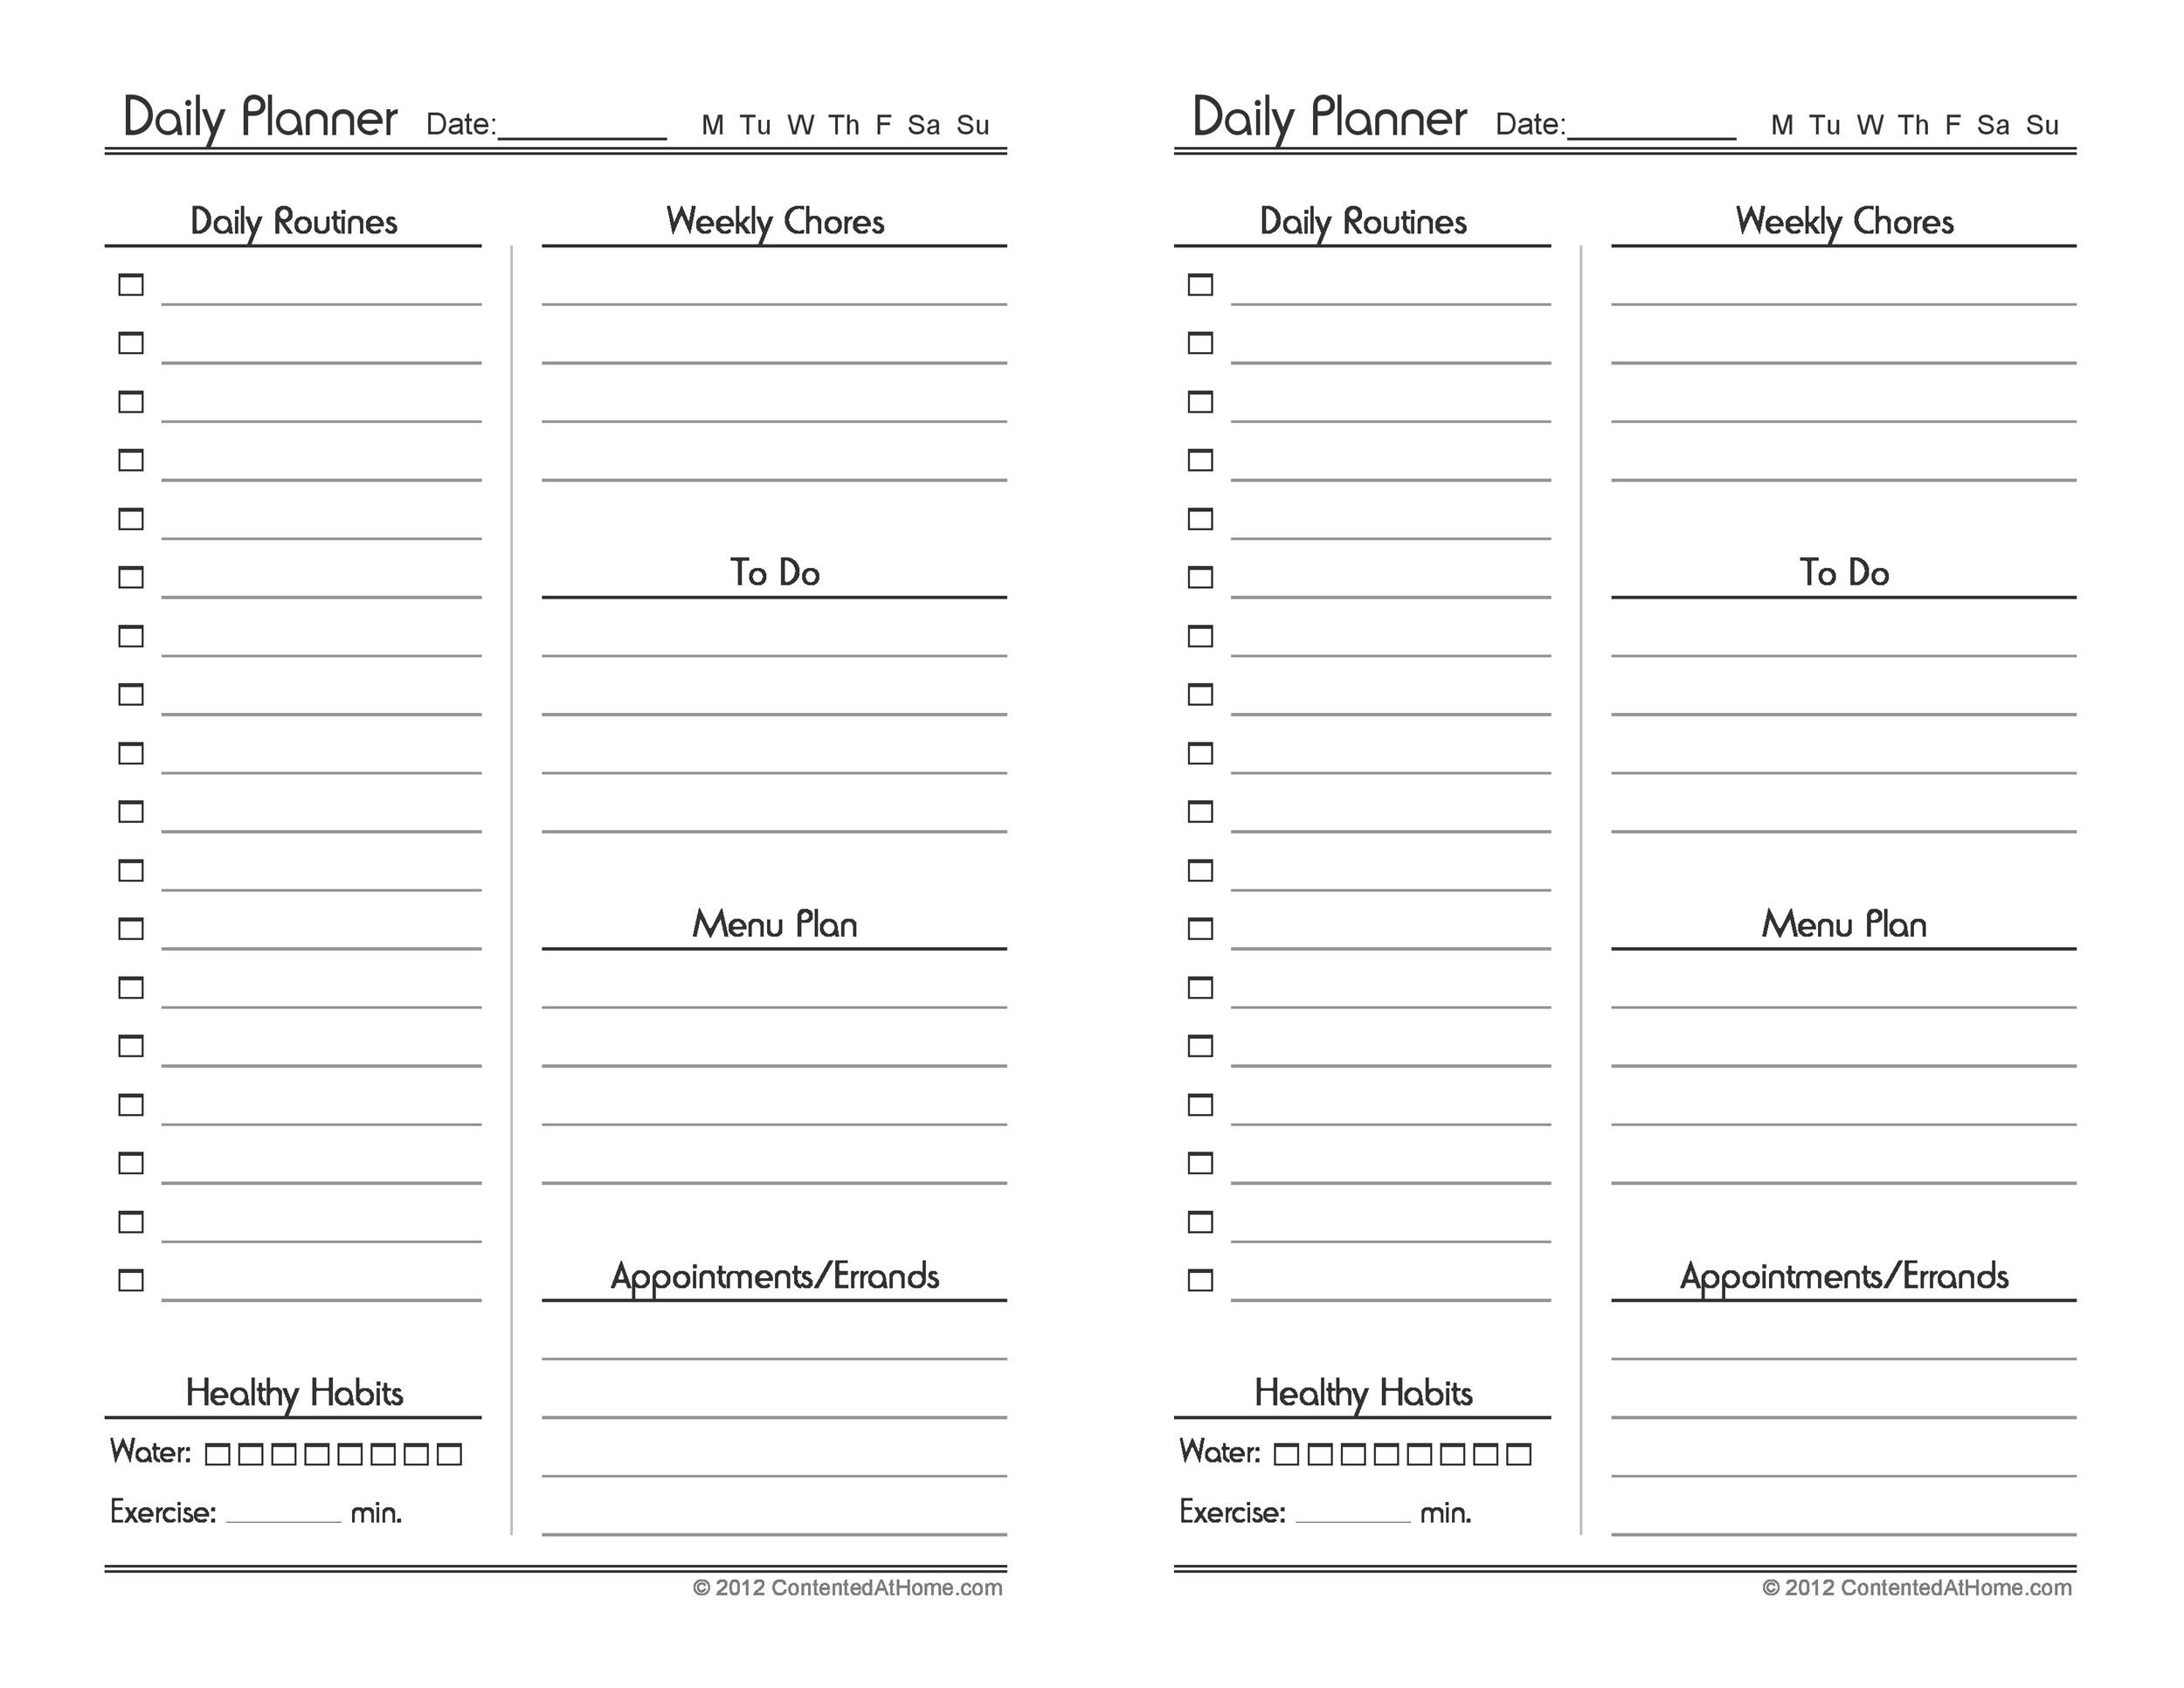 daily-planners-in-microsoft-word-format-20-templates